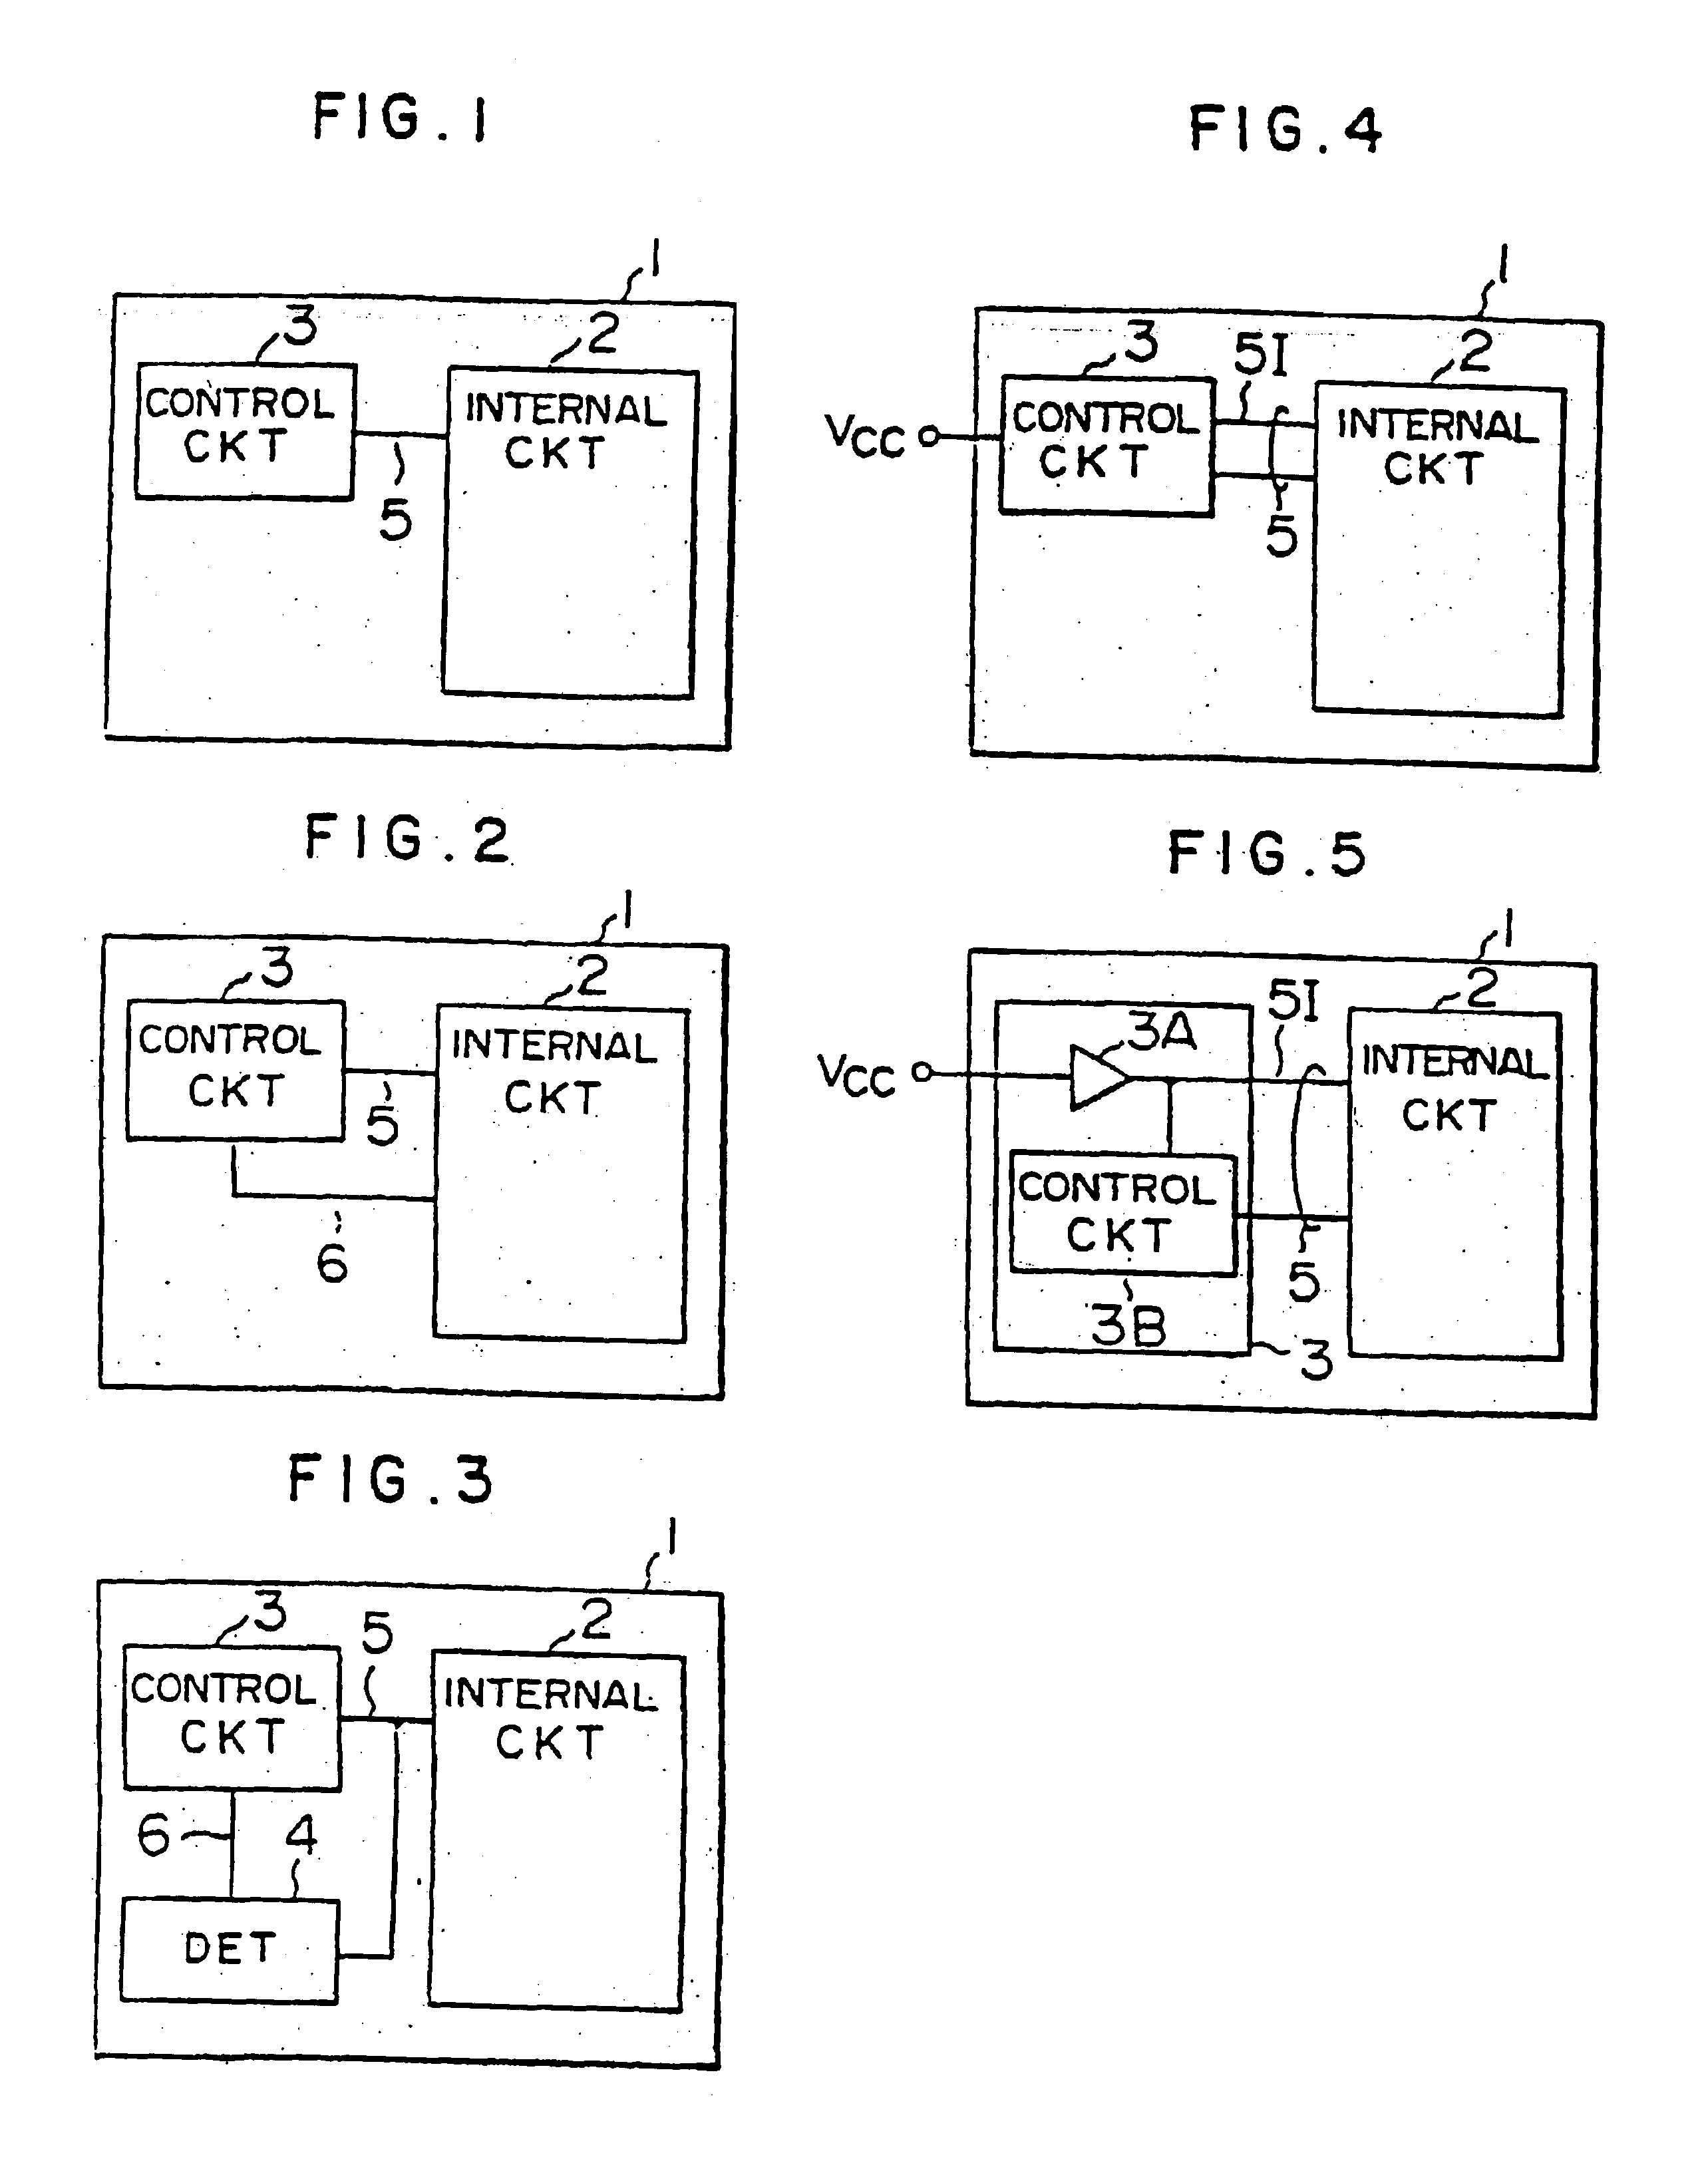 Semiconductor device incorporating internal power supply for compensating for deviation in operating condition and fabrication process conditions